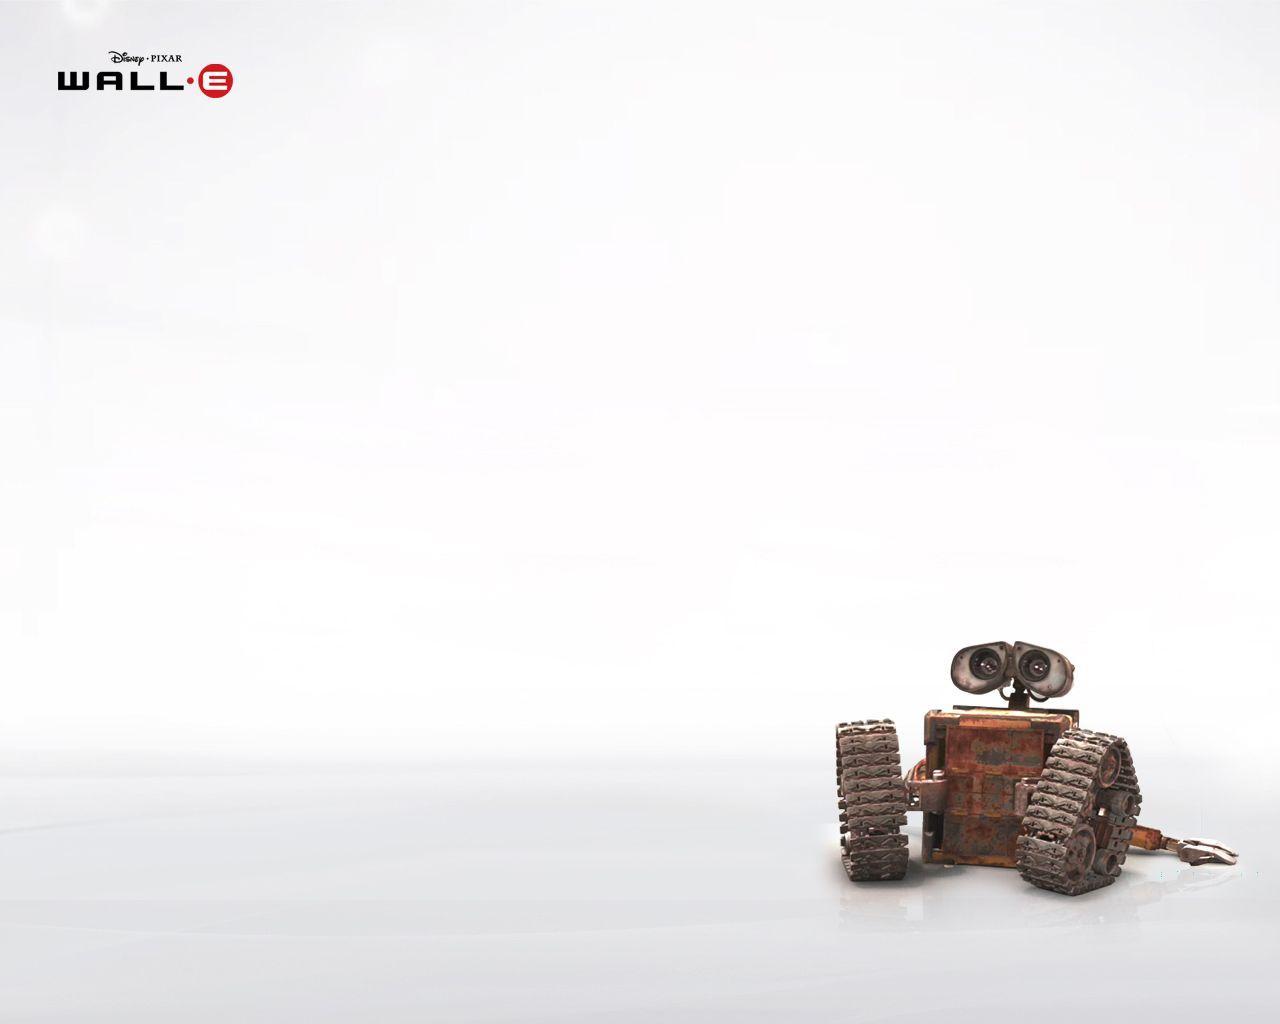 Free Download High Quality WALL E Wallpaper Num. 1, 1280 X 1024